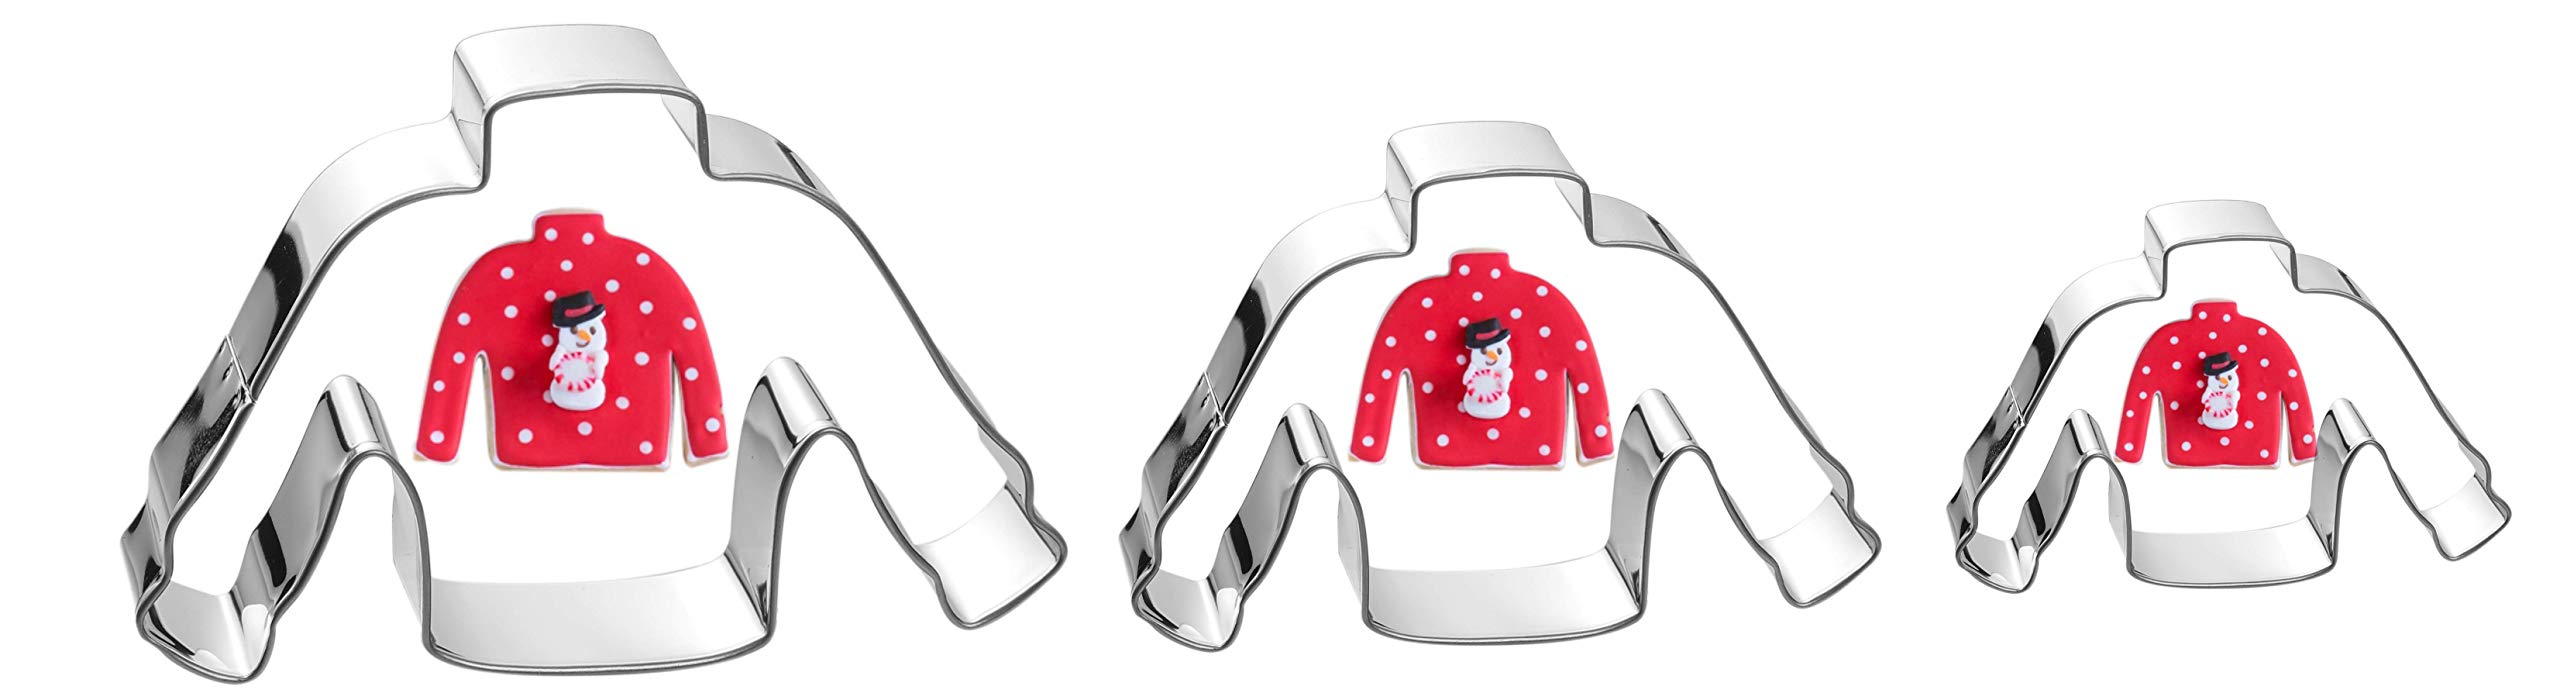 Christmas Ugly Winter Sweater Cookie Cutter Set - 3 Pieces In Graduated Size - Stainless Steel